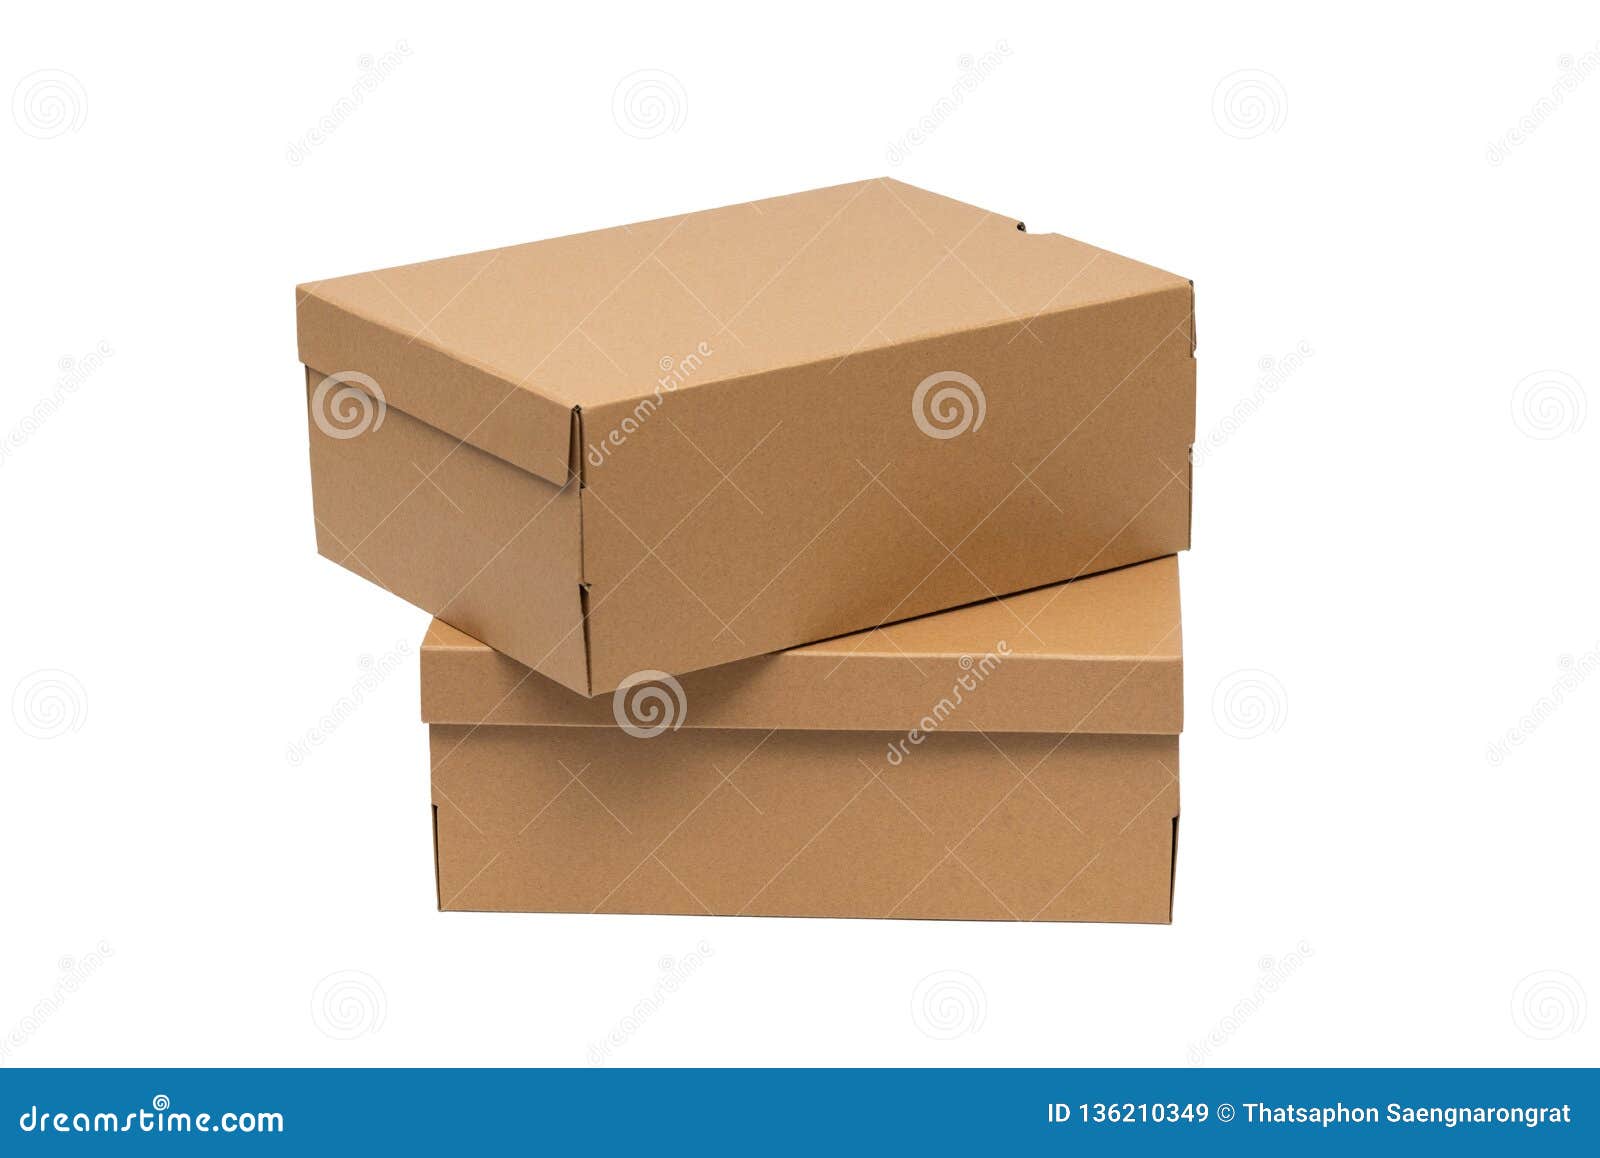 Download Brown Cardboard Shoes Box With Lid For Shoe Or Sneaker ...